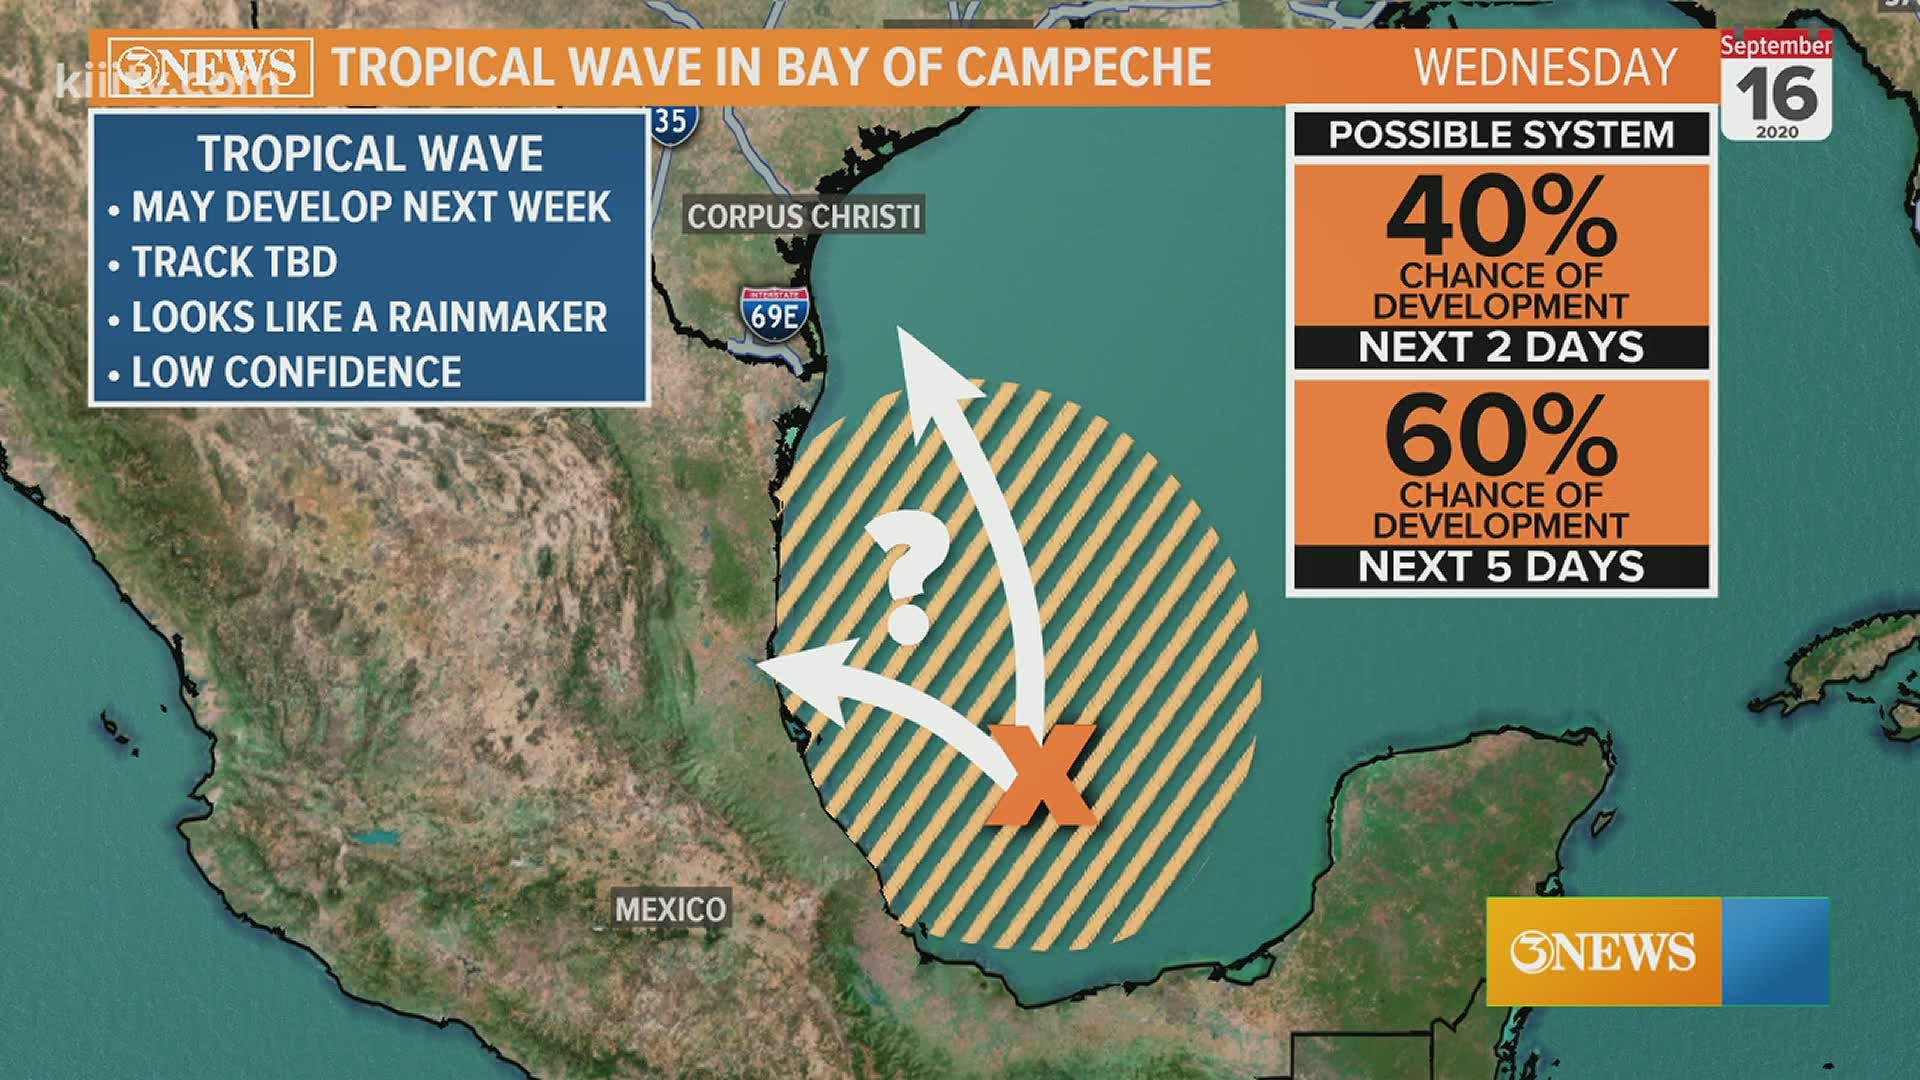 A tropical wave in the Bay of Campeche needs to be watched closely. It's looking more and more like it will develop. Track and intensity still very much in question.